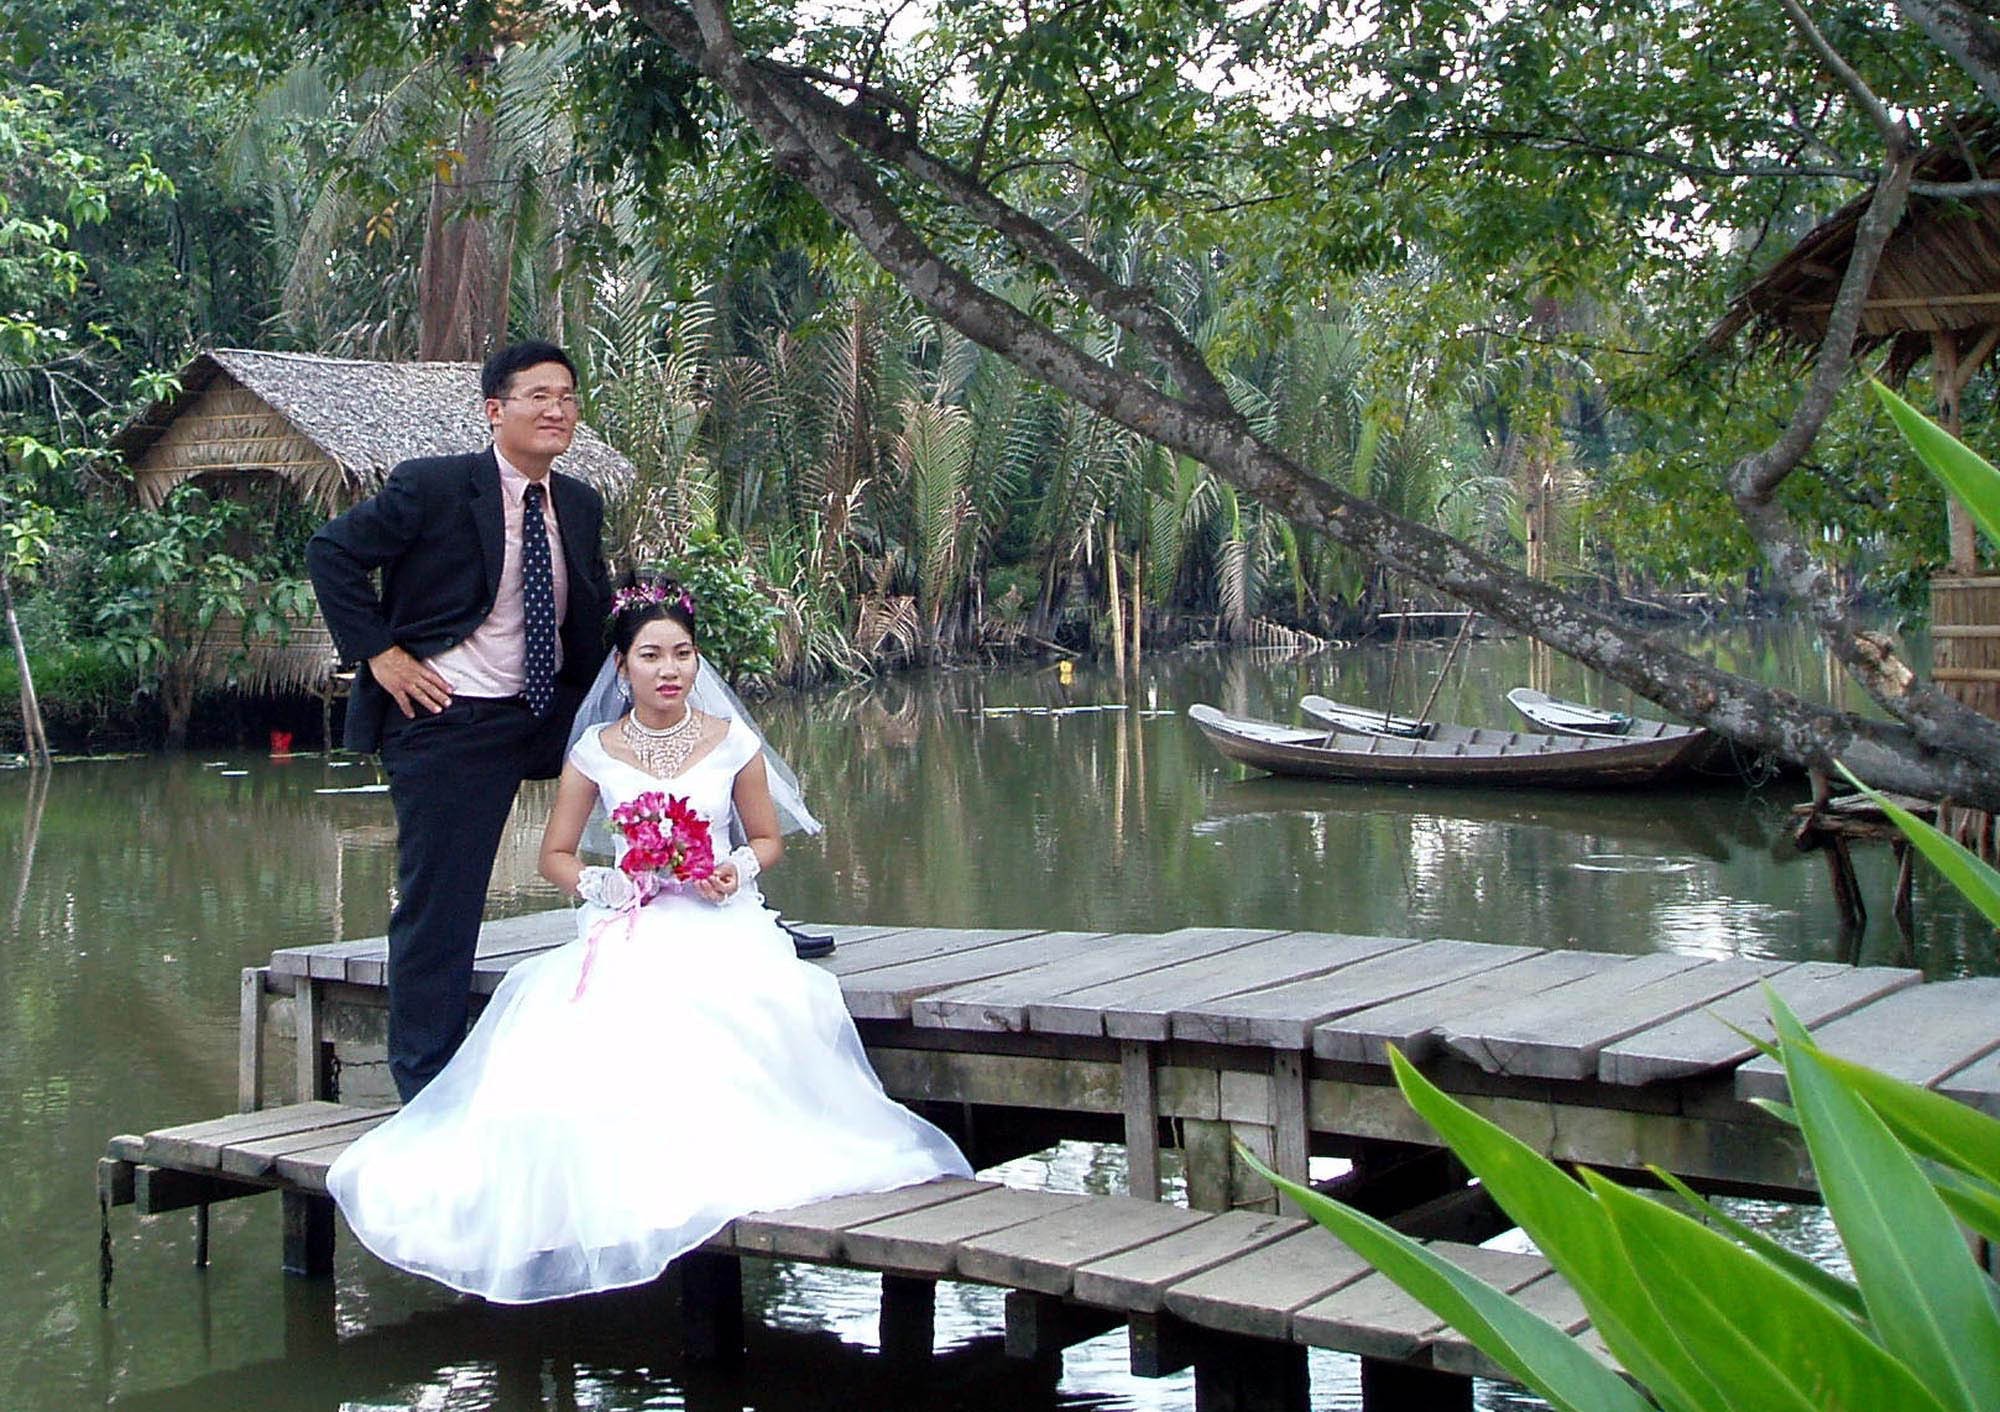 A South Korean man poses with his Vietnamese bride for their wedding photo at a park in Ho Chi Minh City, Vietnam. Photo: AP